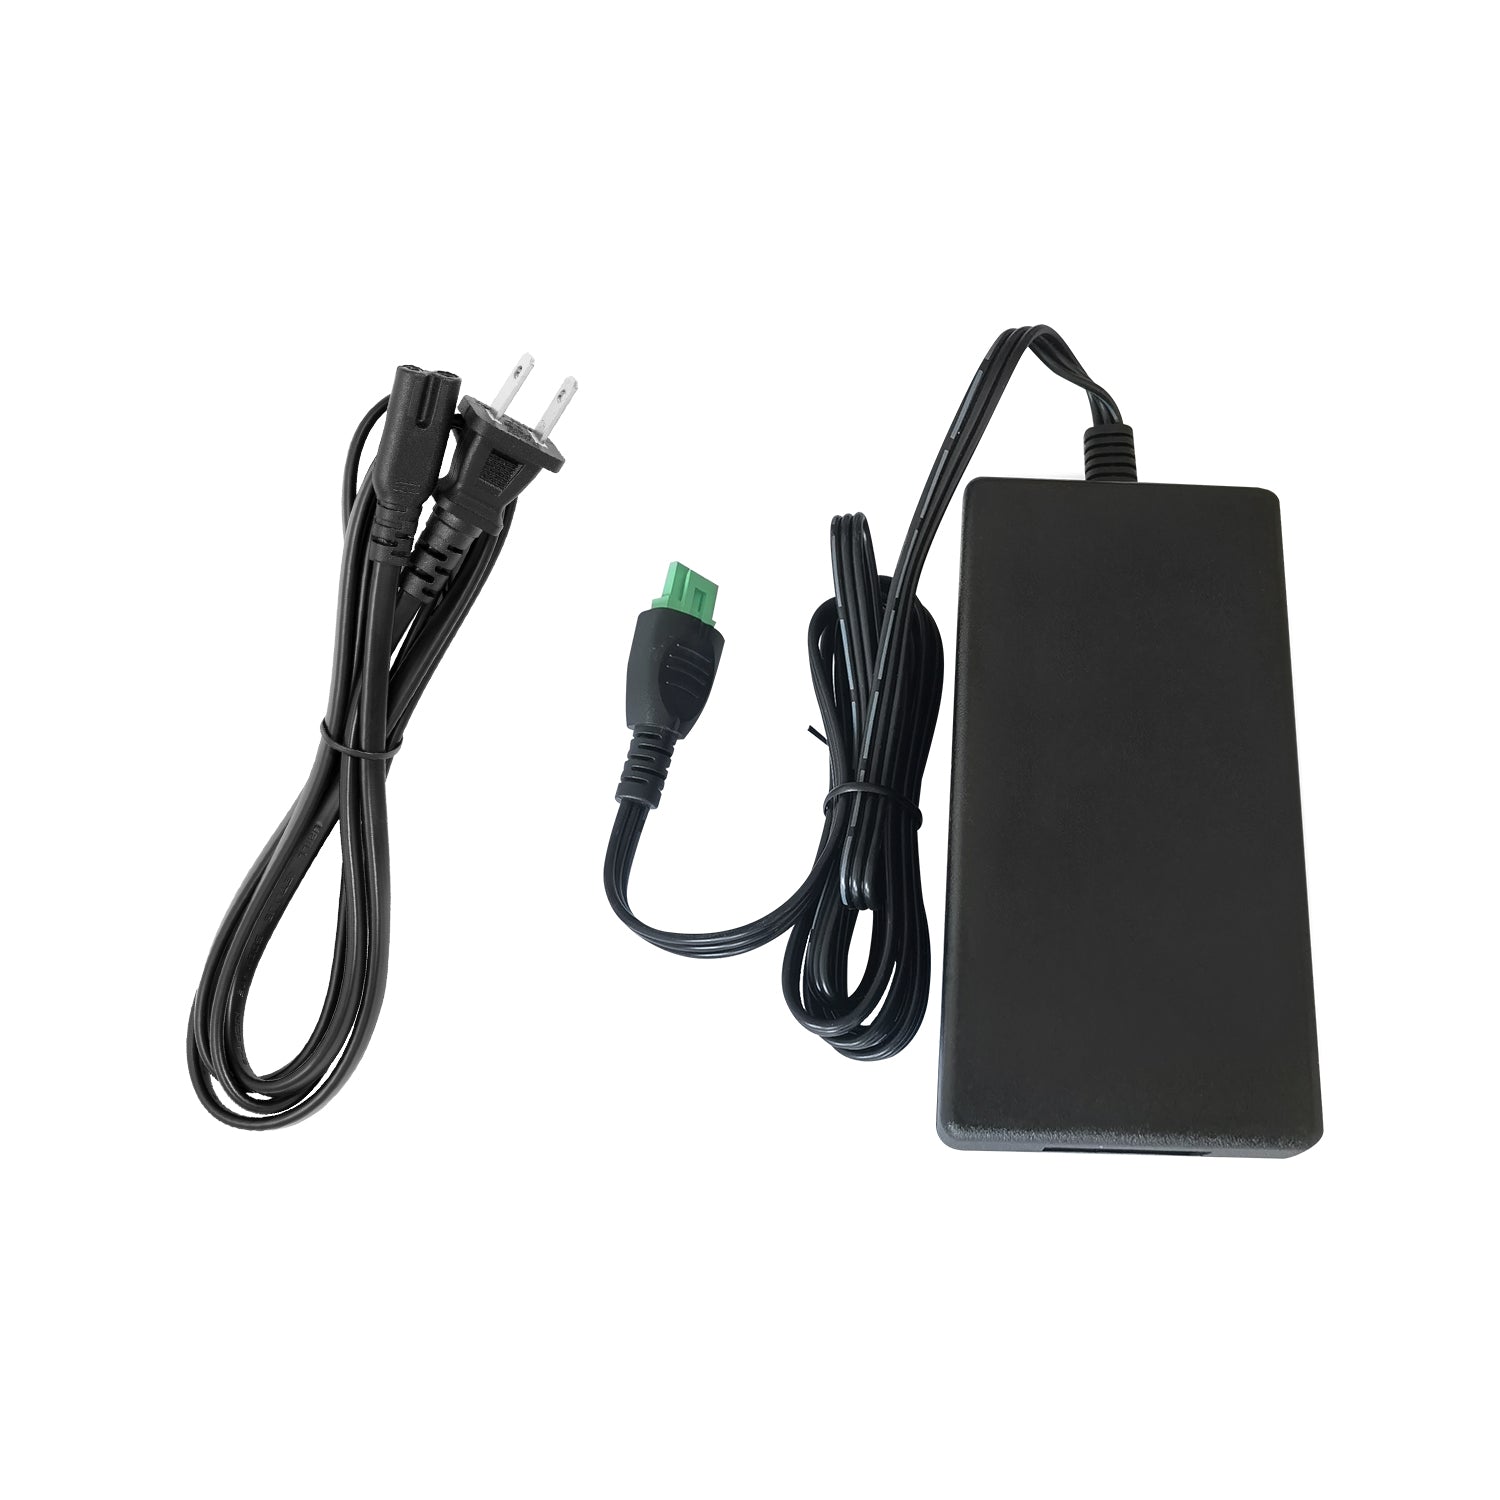 Compatible Replacement hp photosmart 7520 Printer AC Adapter.